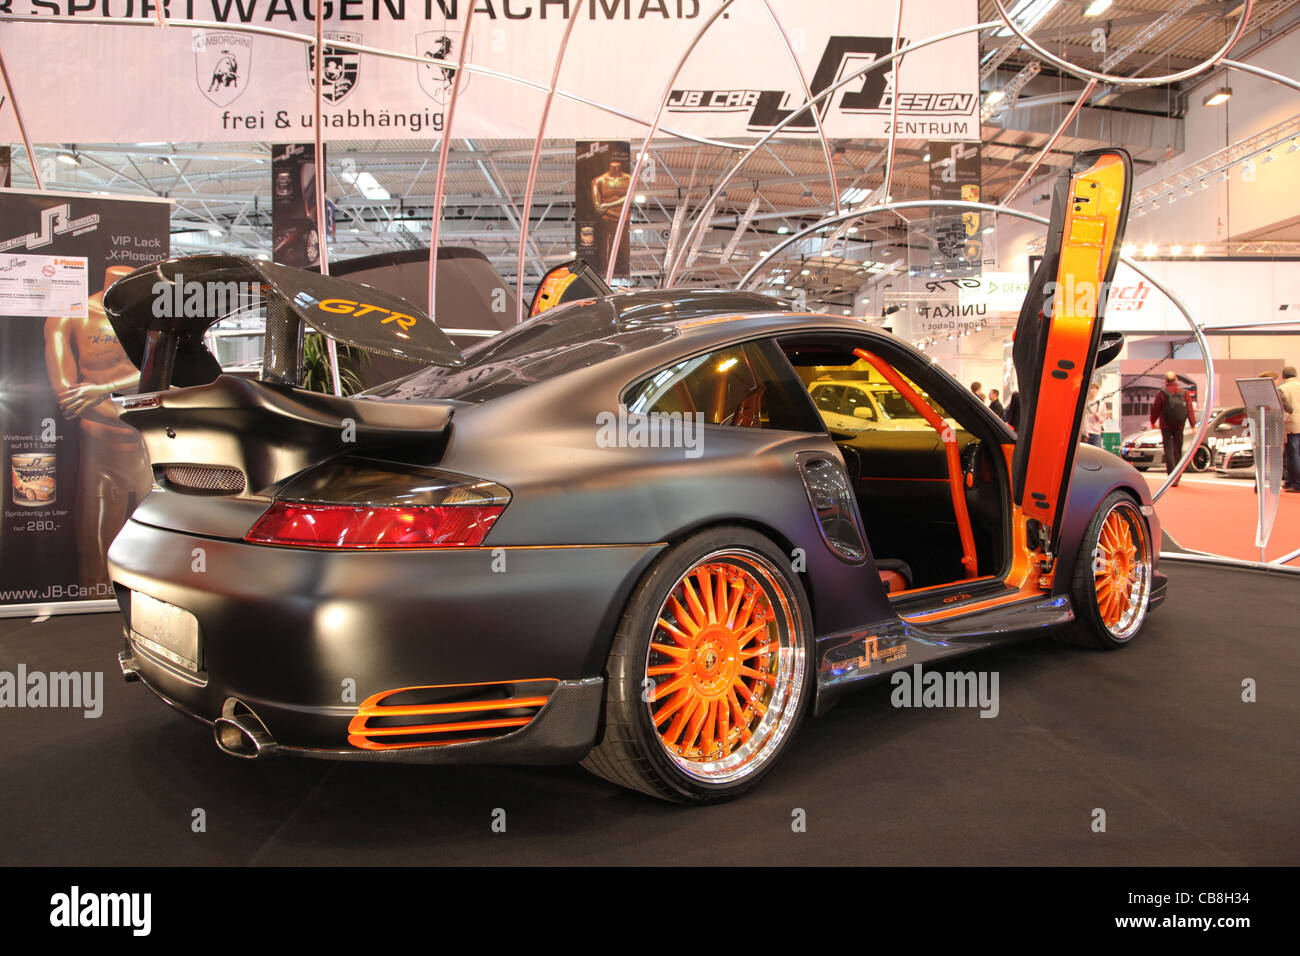 Porsche GTR with gull-wing doors shown at the Essen Motor Show in Essen, Germany, on November 29, 2011 Stock Photo